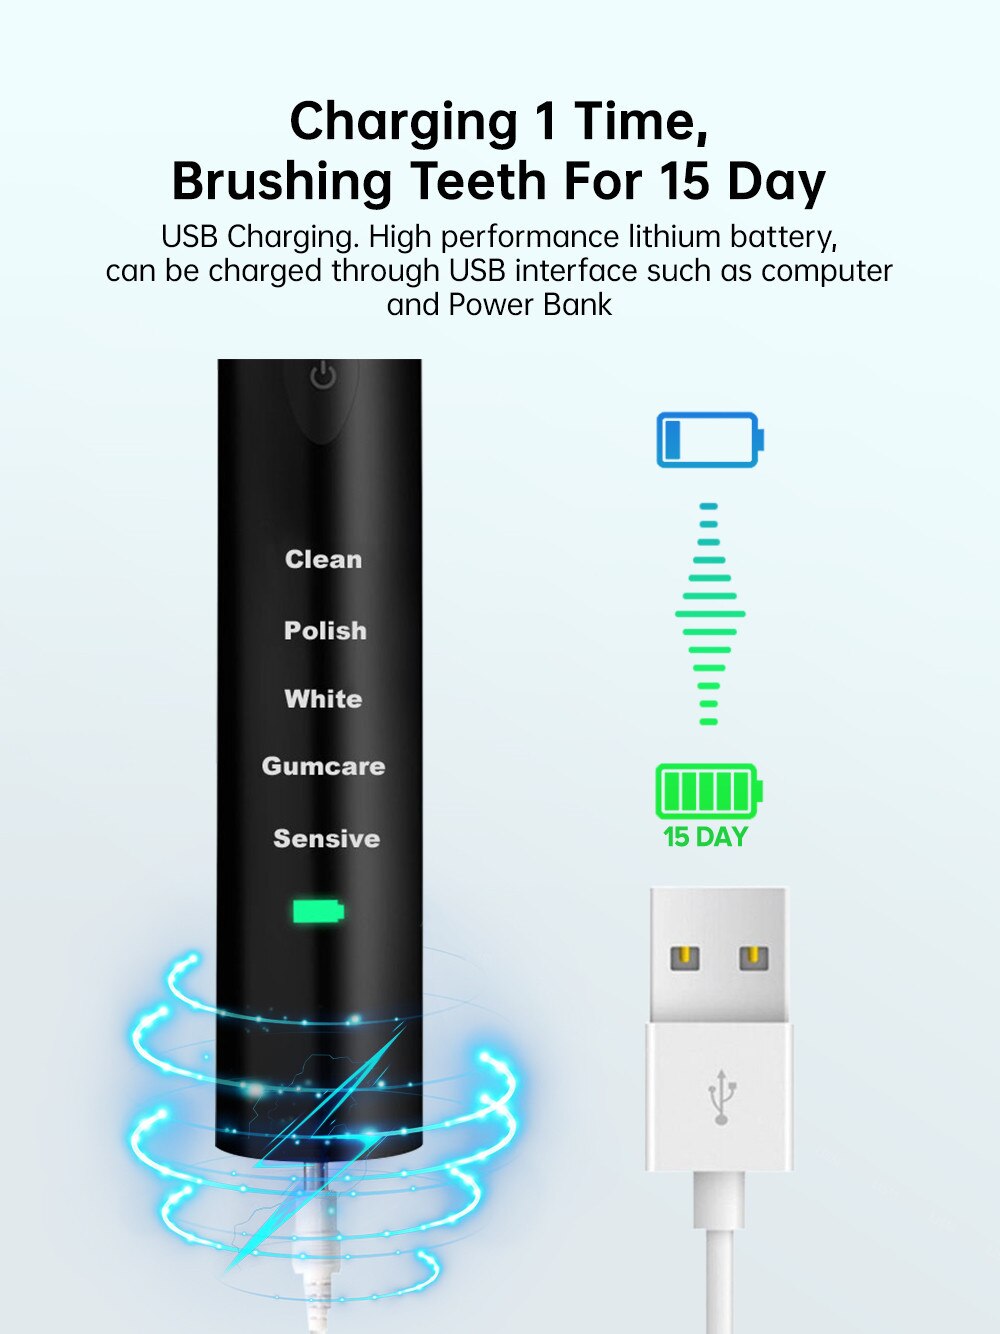 new sonic toothbrush kid electr electric toothbrush adul